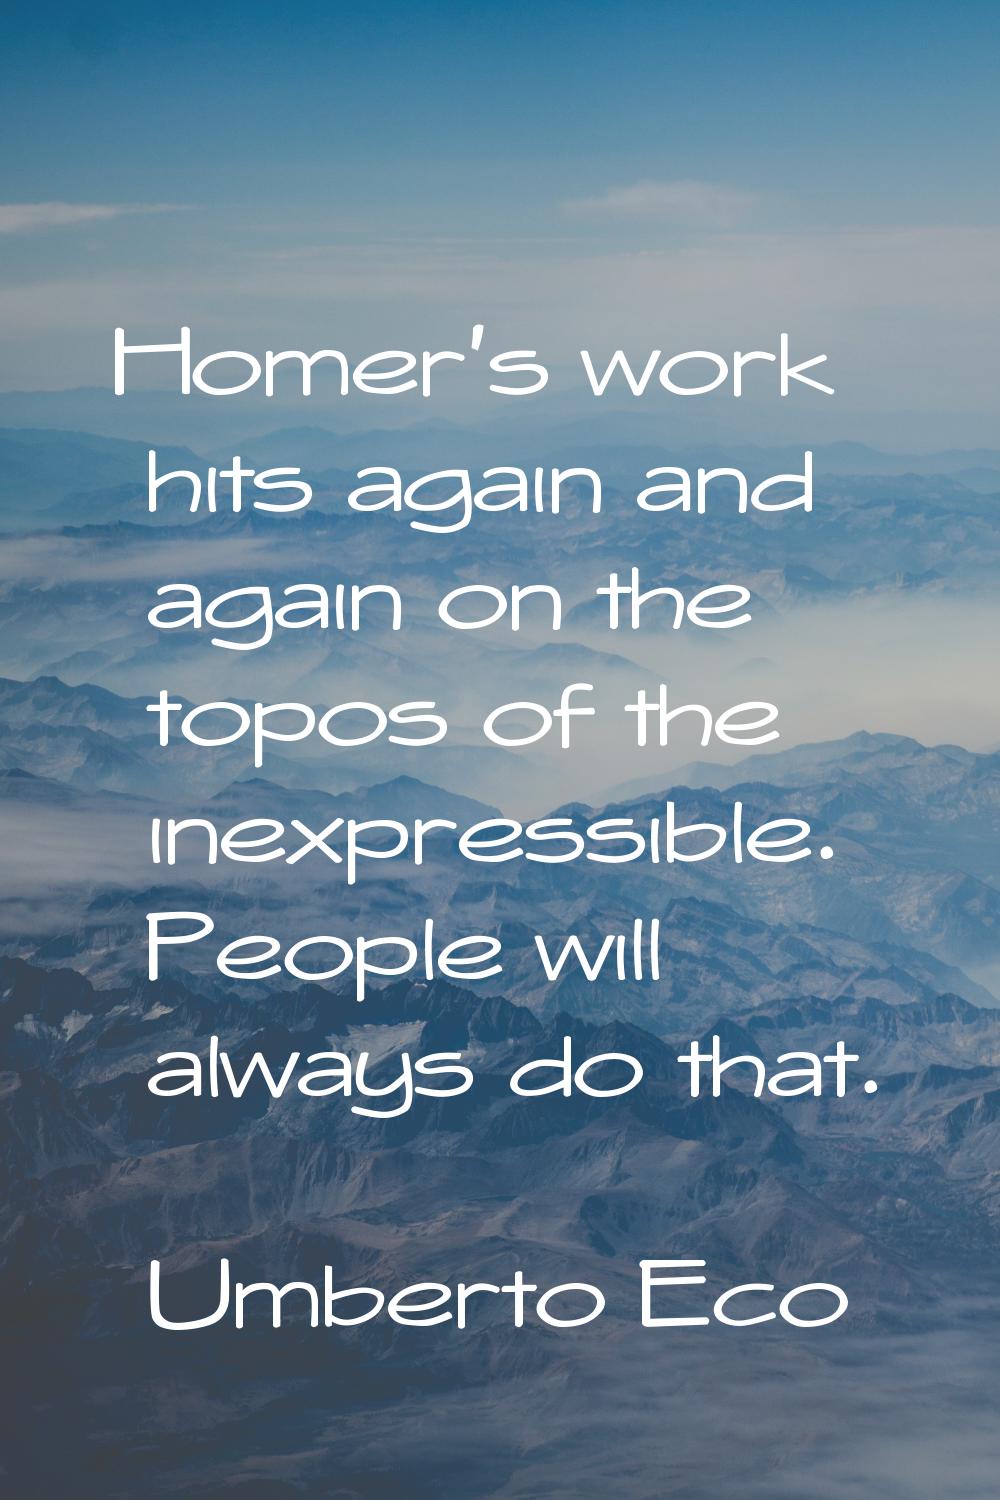 Homer's work hits again and again on the topos of the inexpressible. People will always do that.